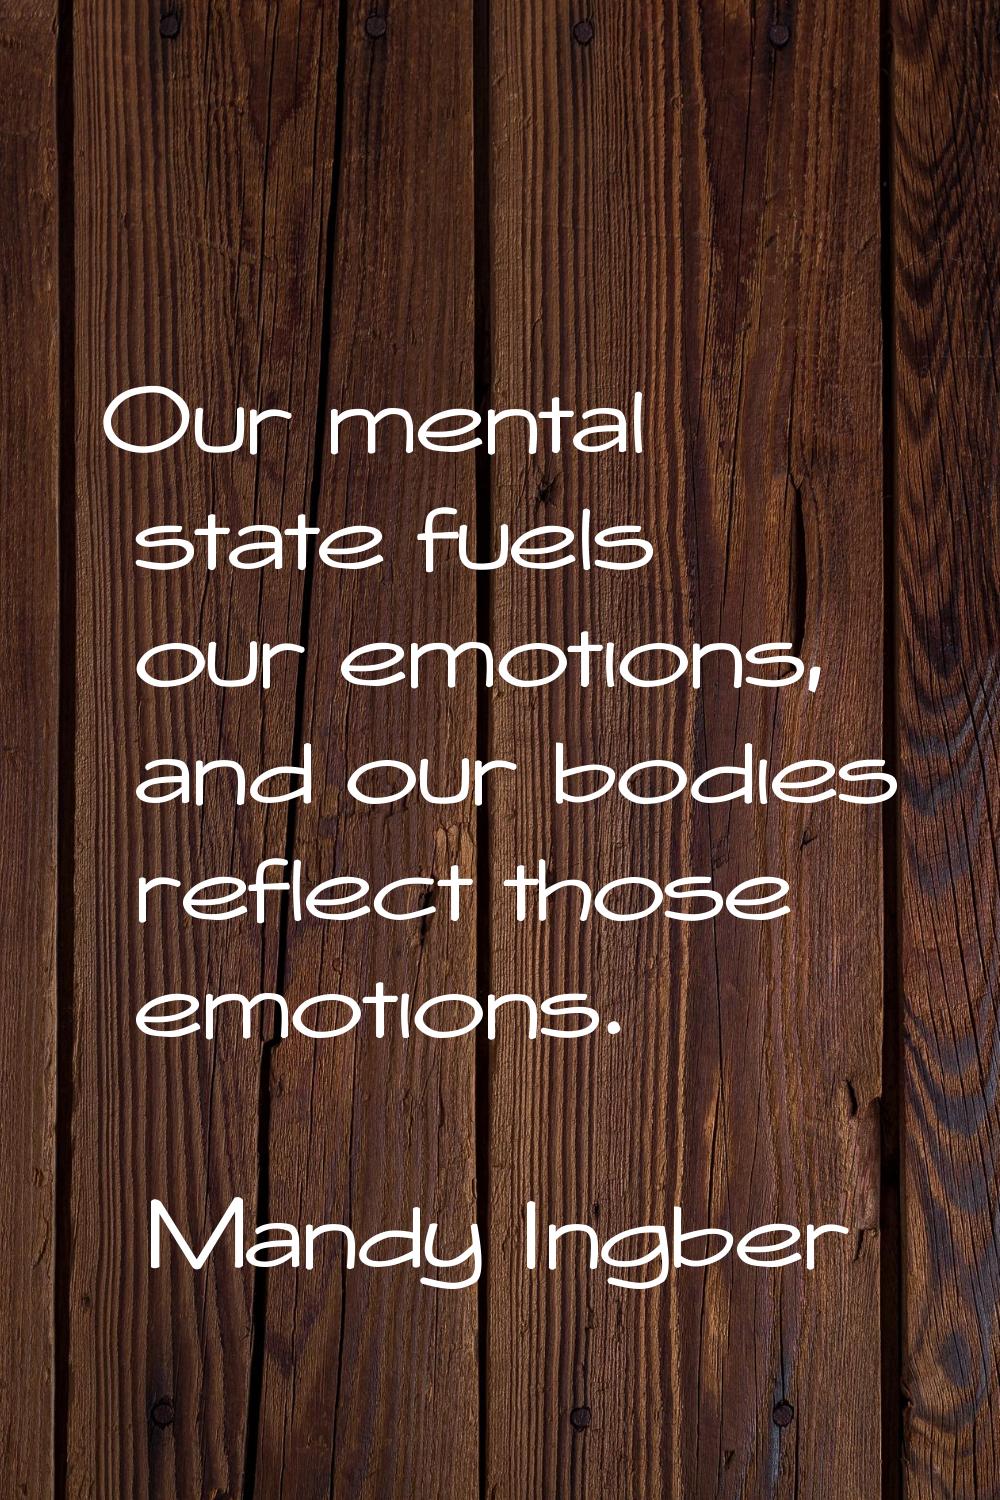 Our mental state fuels our emotions, and our bodies reflect those emotions.